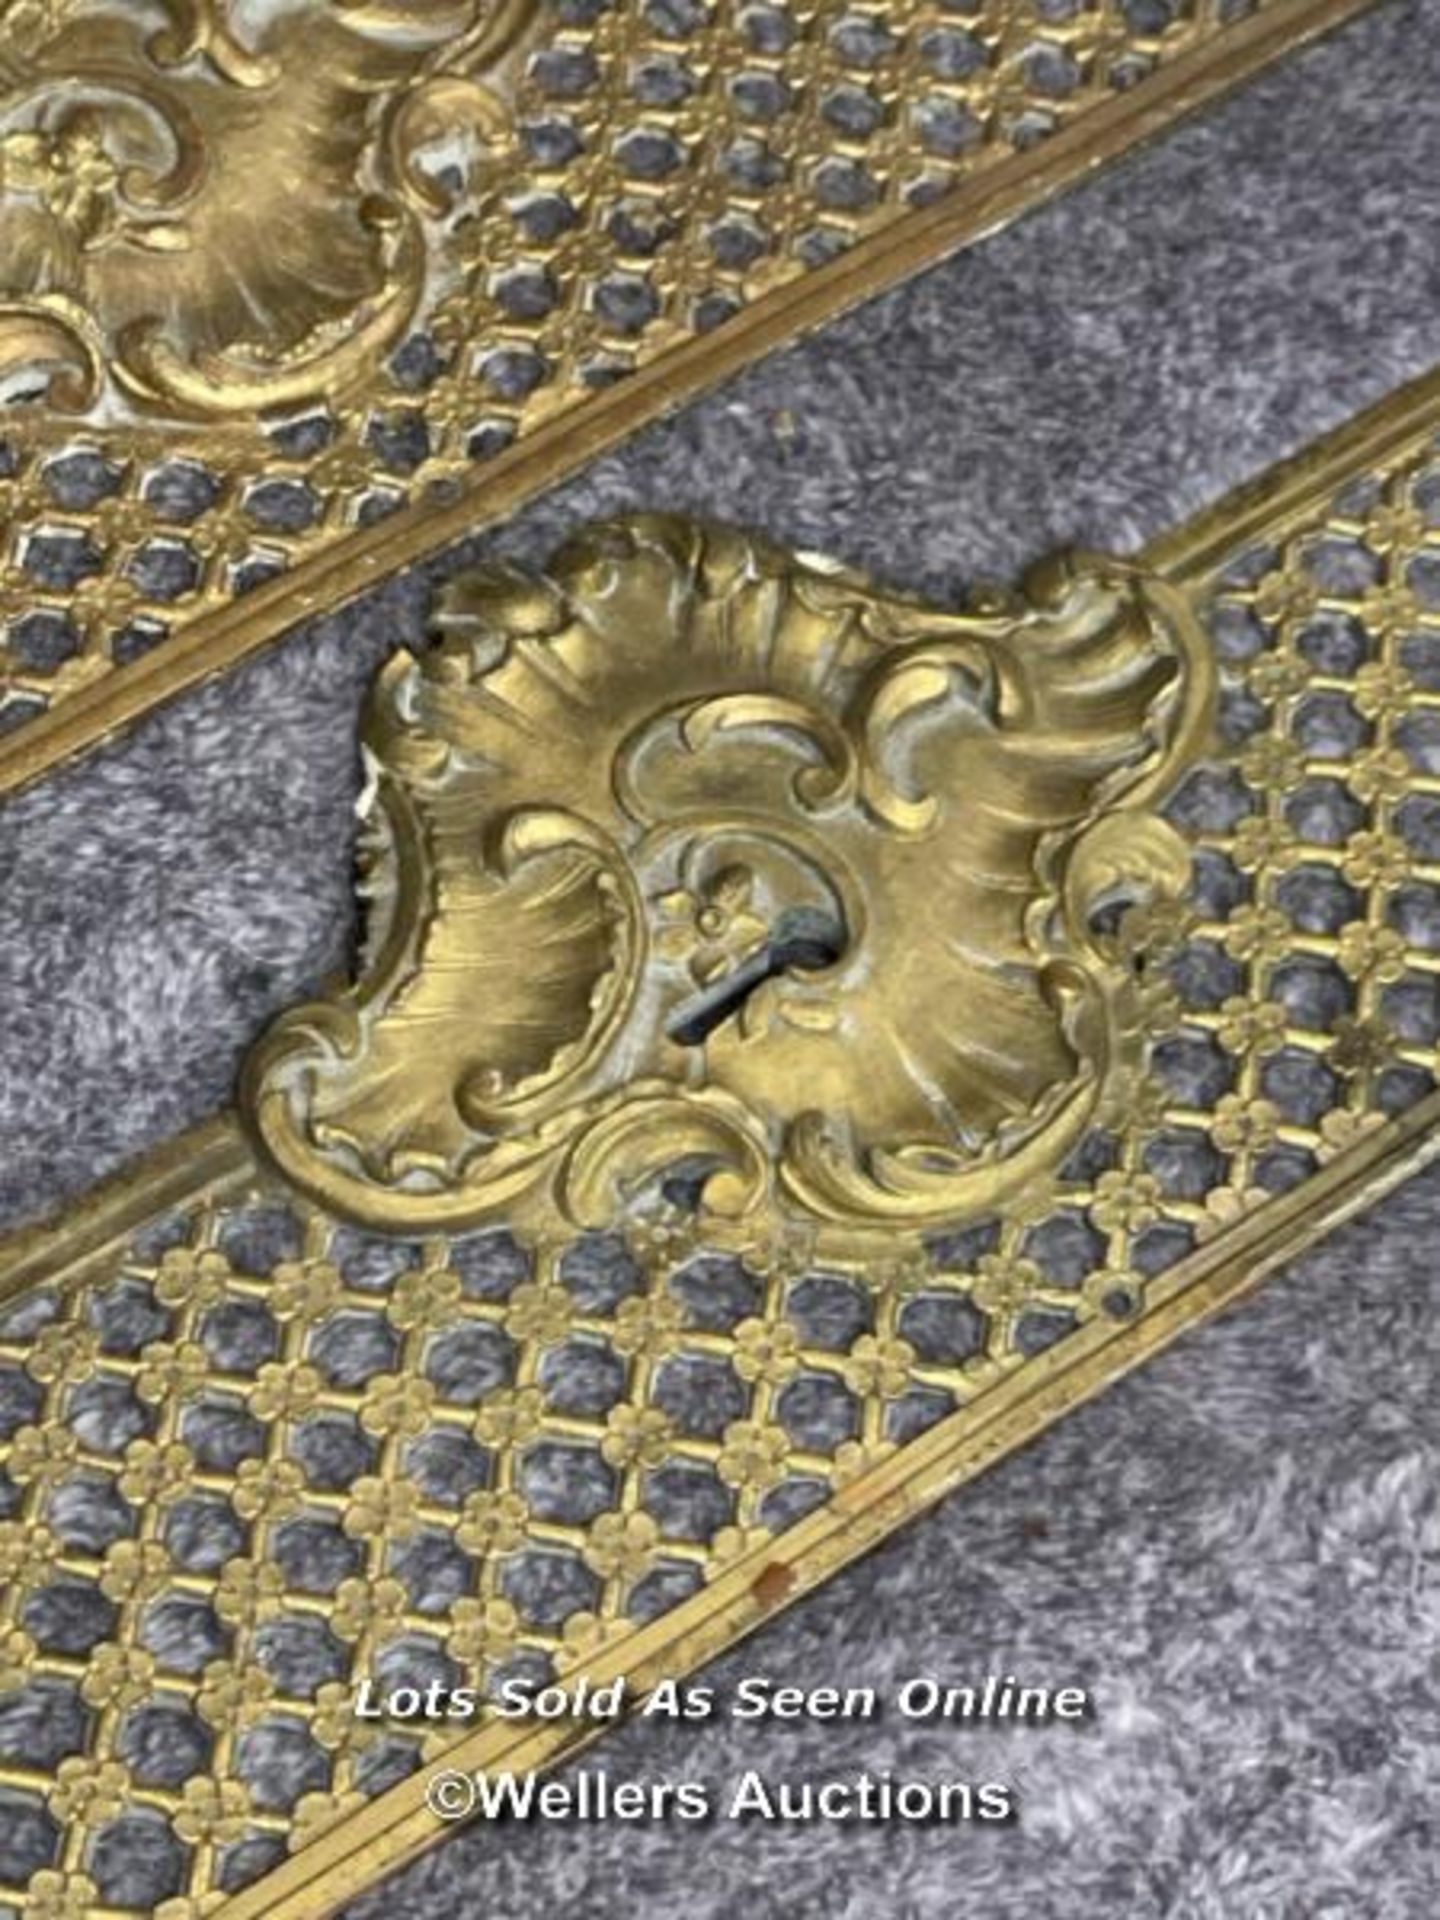 Four brass door handle backings with floral centrepiece and edging, 47cm long x 11.5cm wide - Image 4 of 5